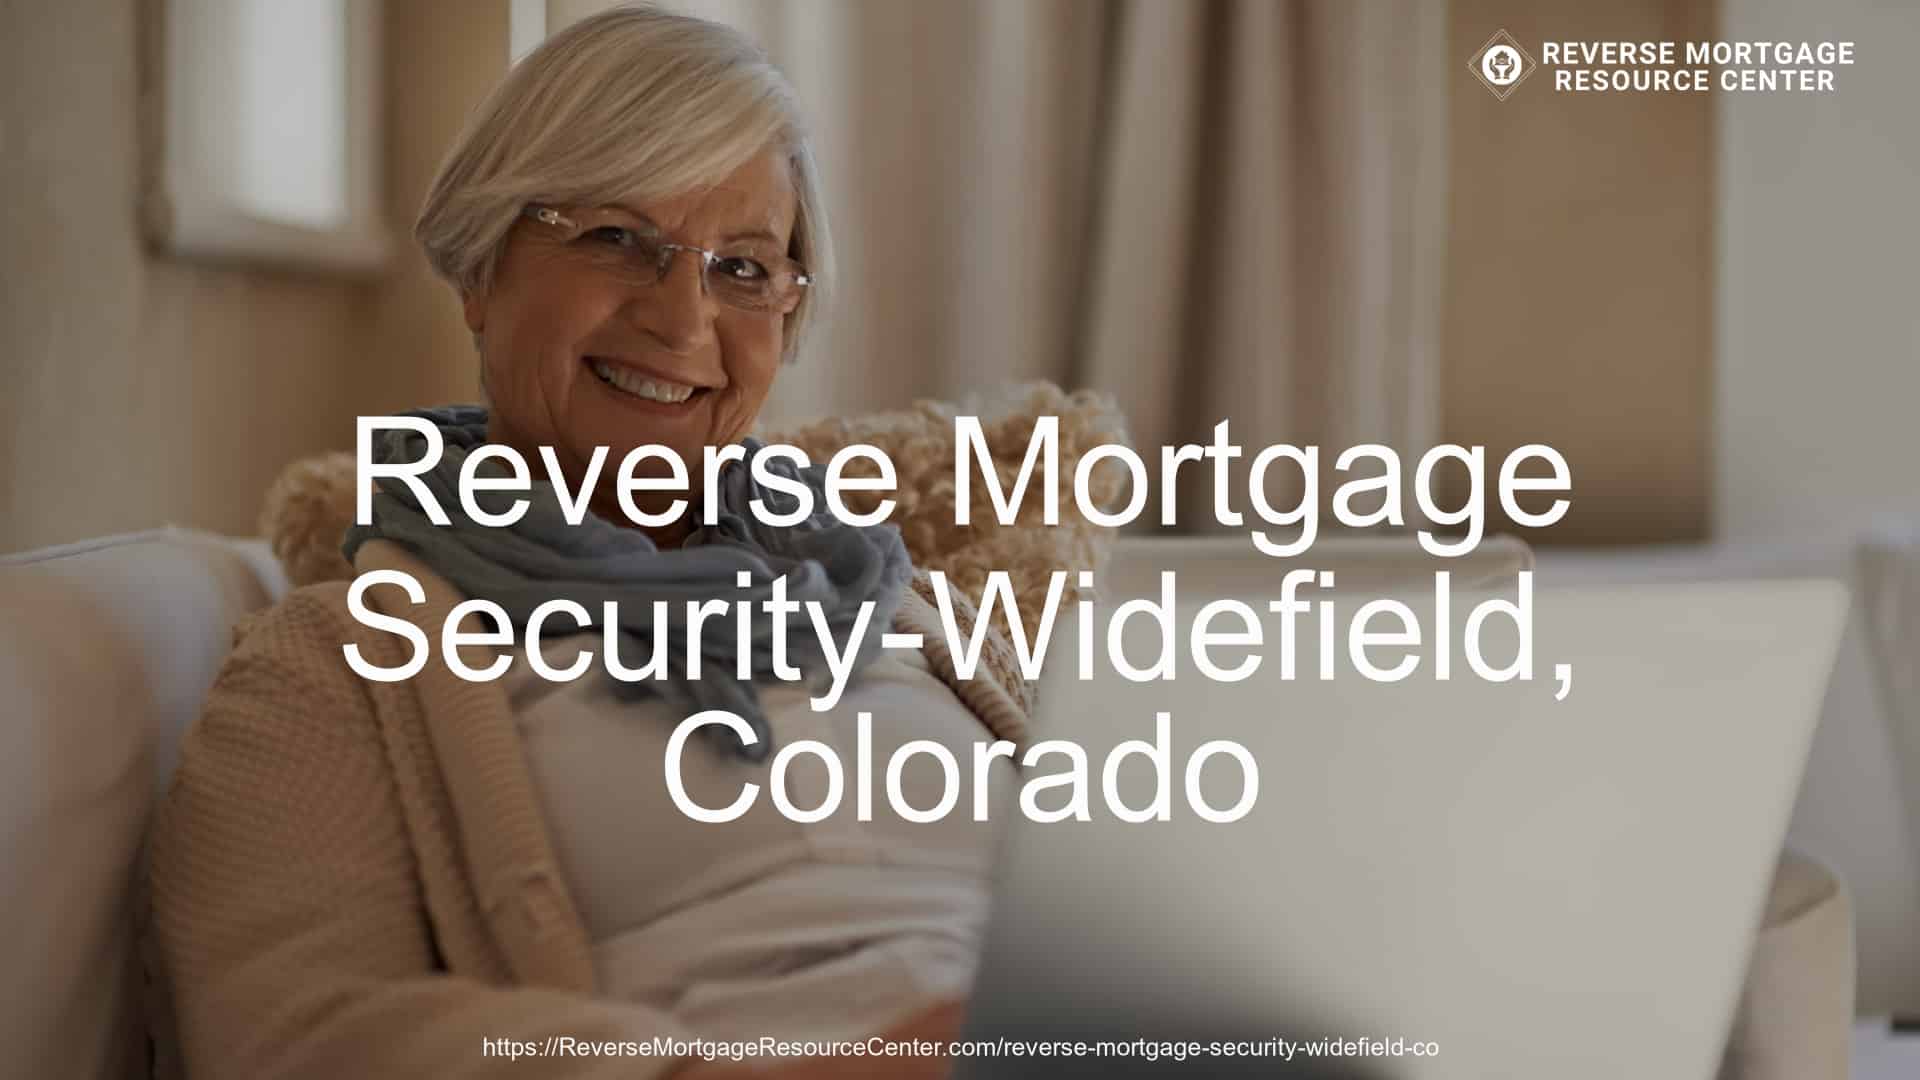 Reverse Mortgage in Security-Widefield, CO